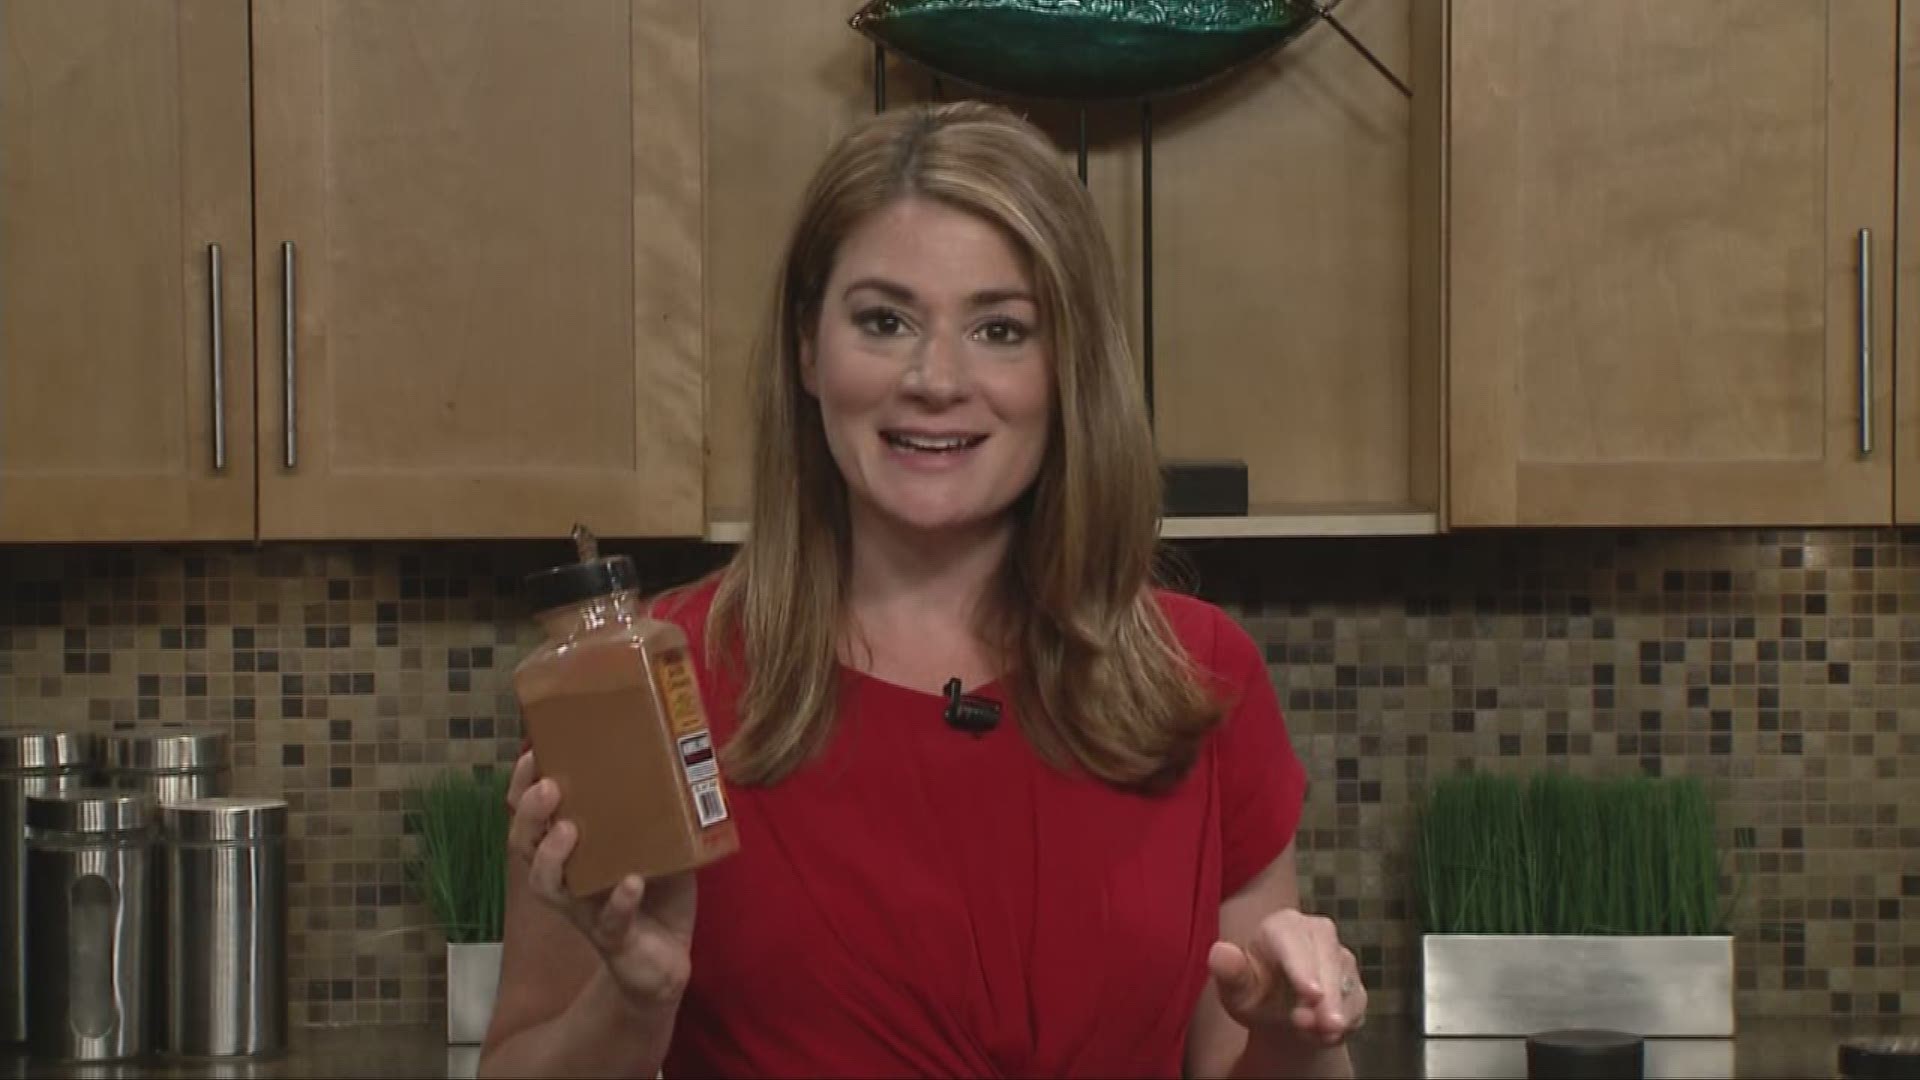 July 20, 2017: Turmeric. Cinnamon. Black pepper. Do these really carry a healthy kick? WKYC's Maureen Kyle speaks with nutritional experts.